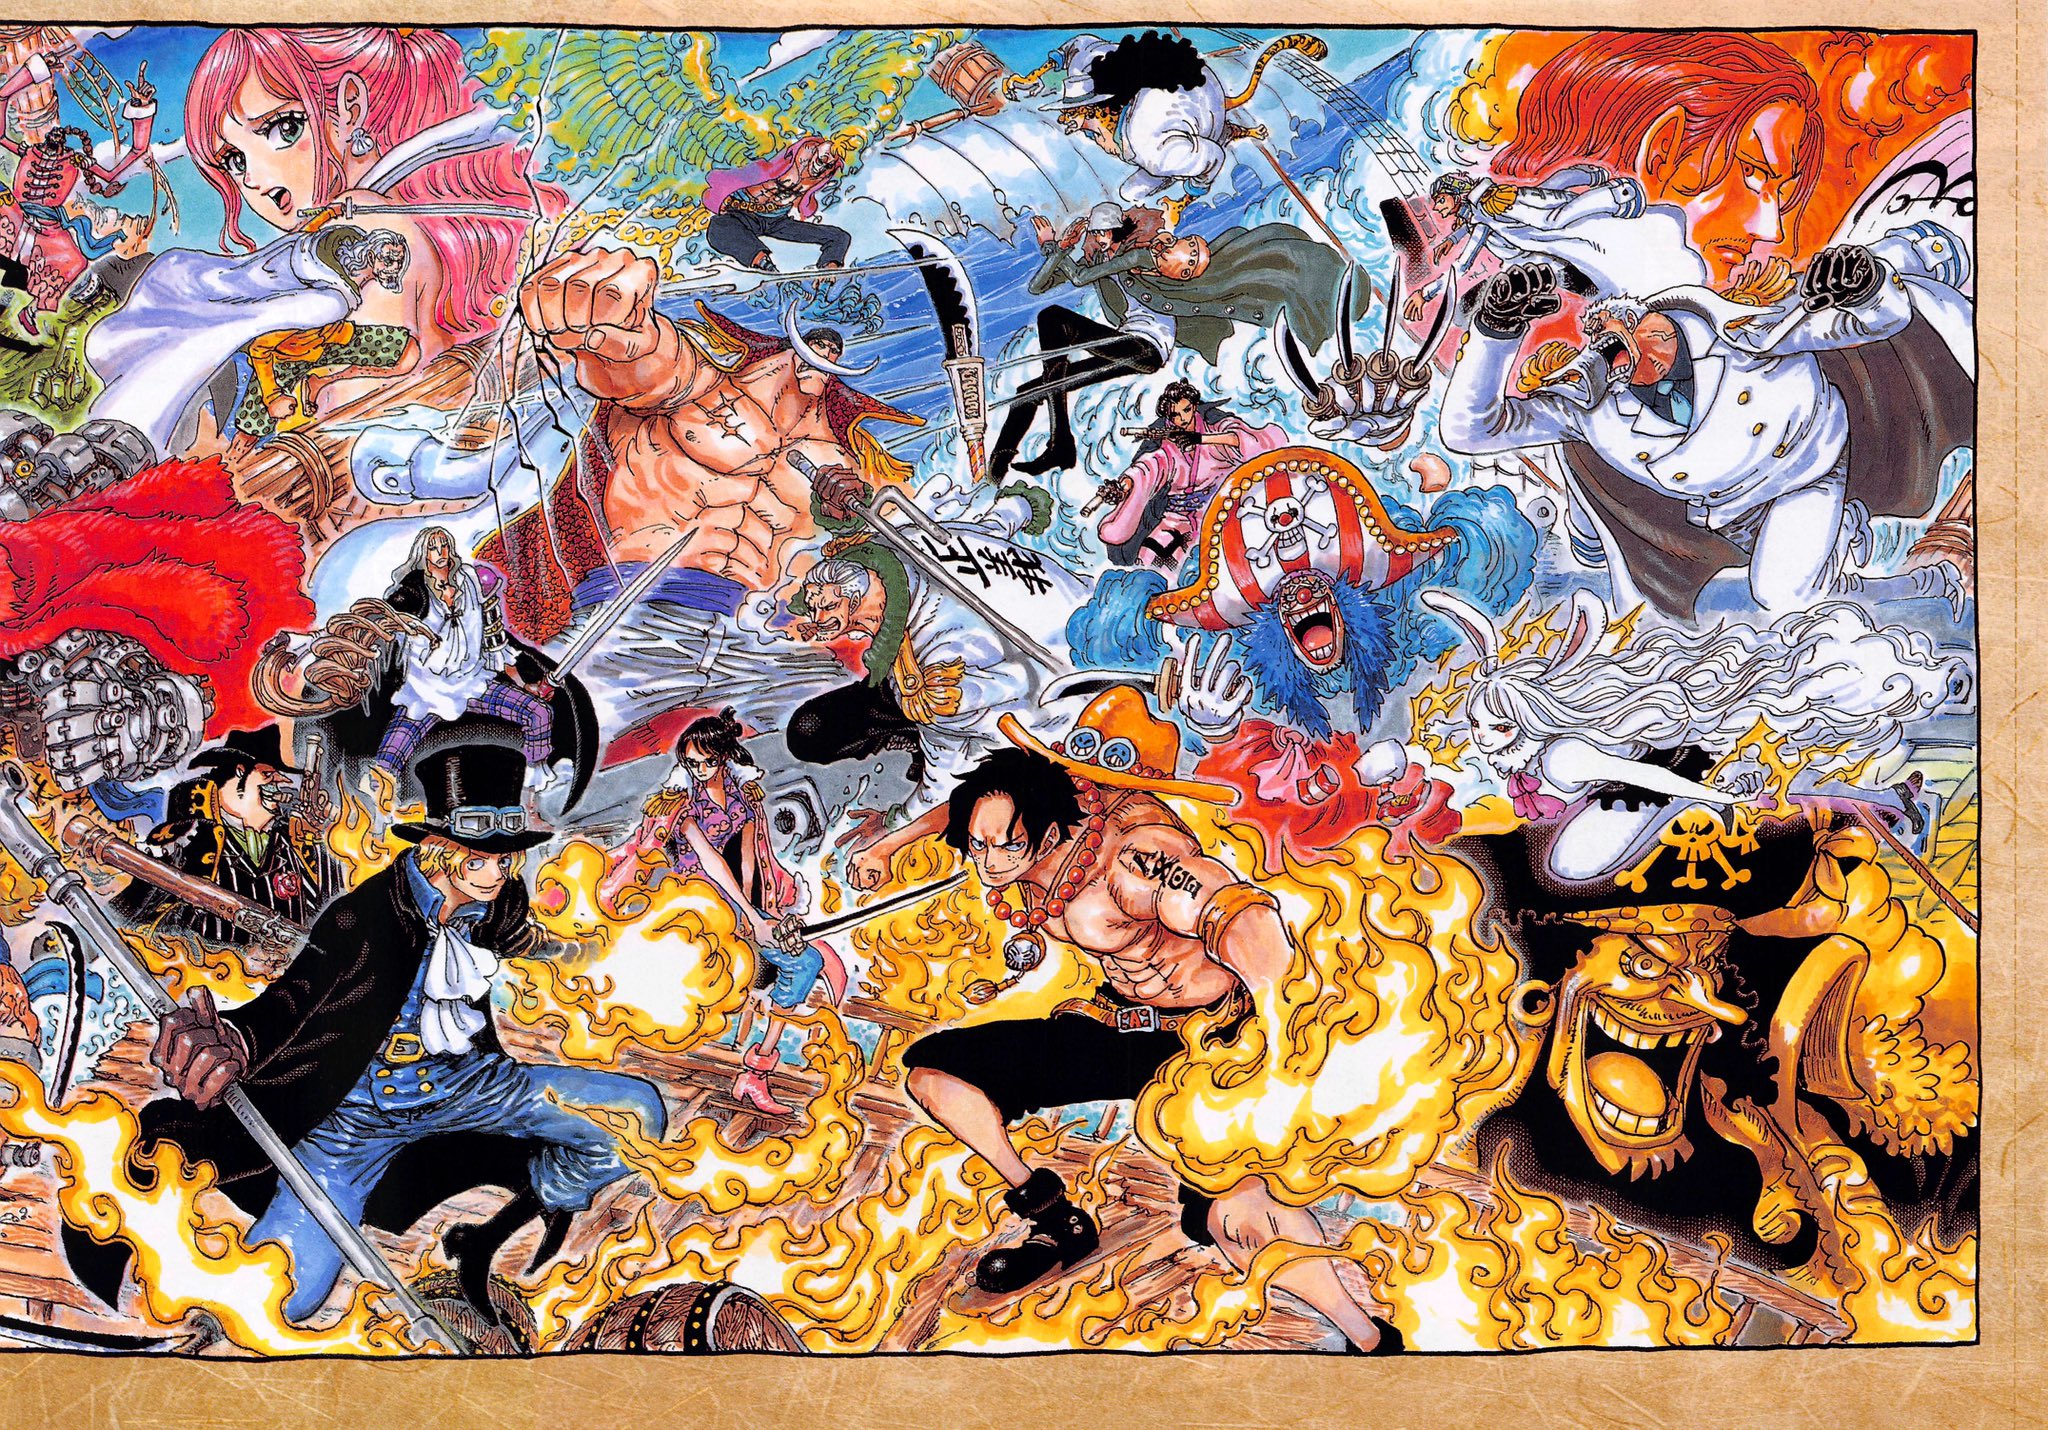 YonkouProductions on X: One Piece 1058-1061 Titles and Staff